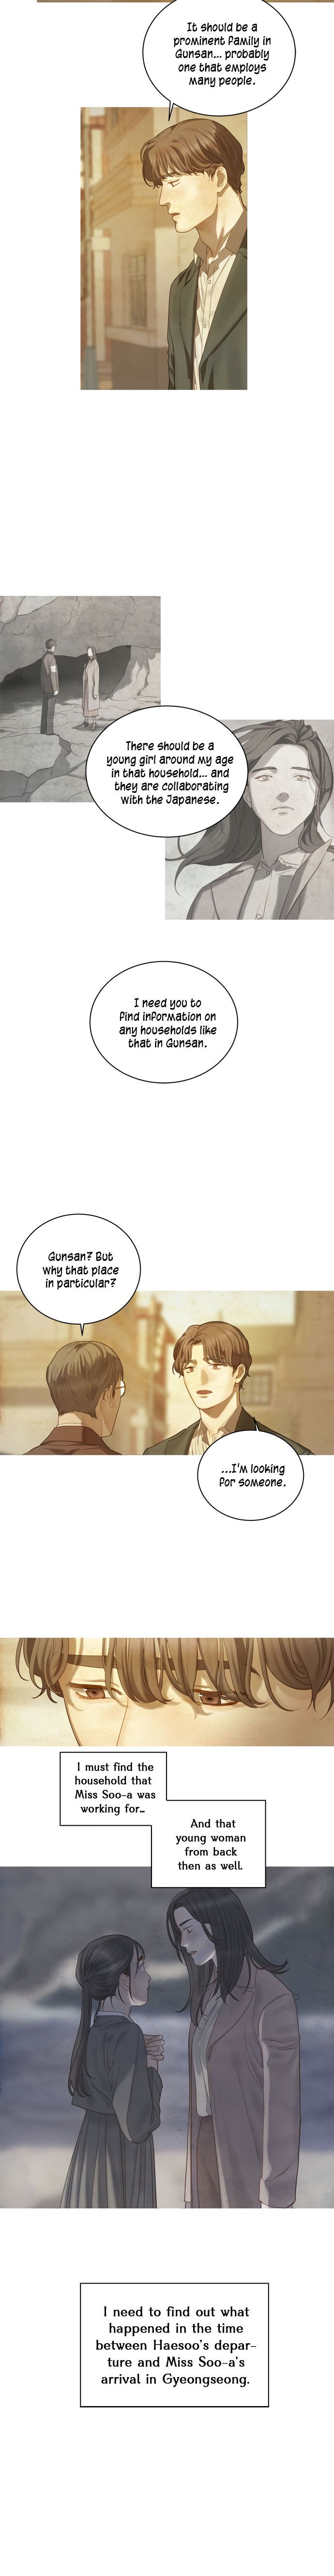 Gorae Byul - The Gyeongseong Mermaid - Chapter 21 Page 6